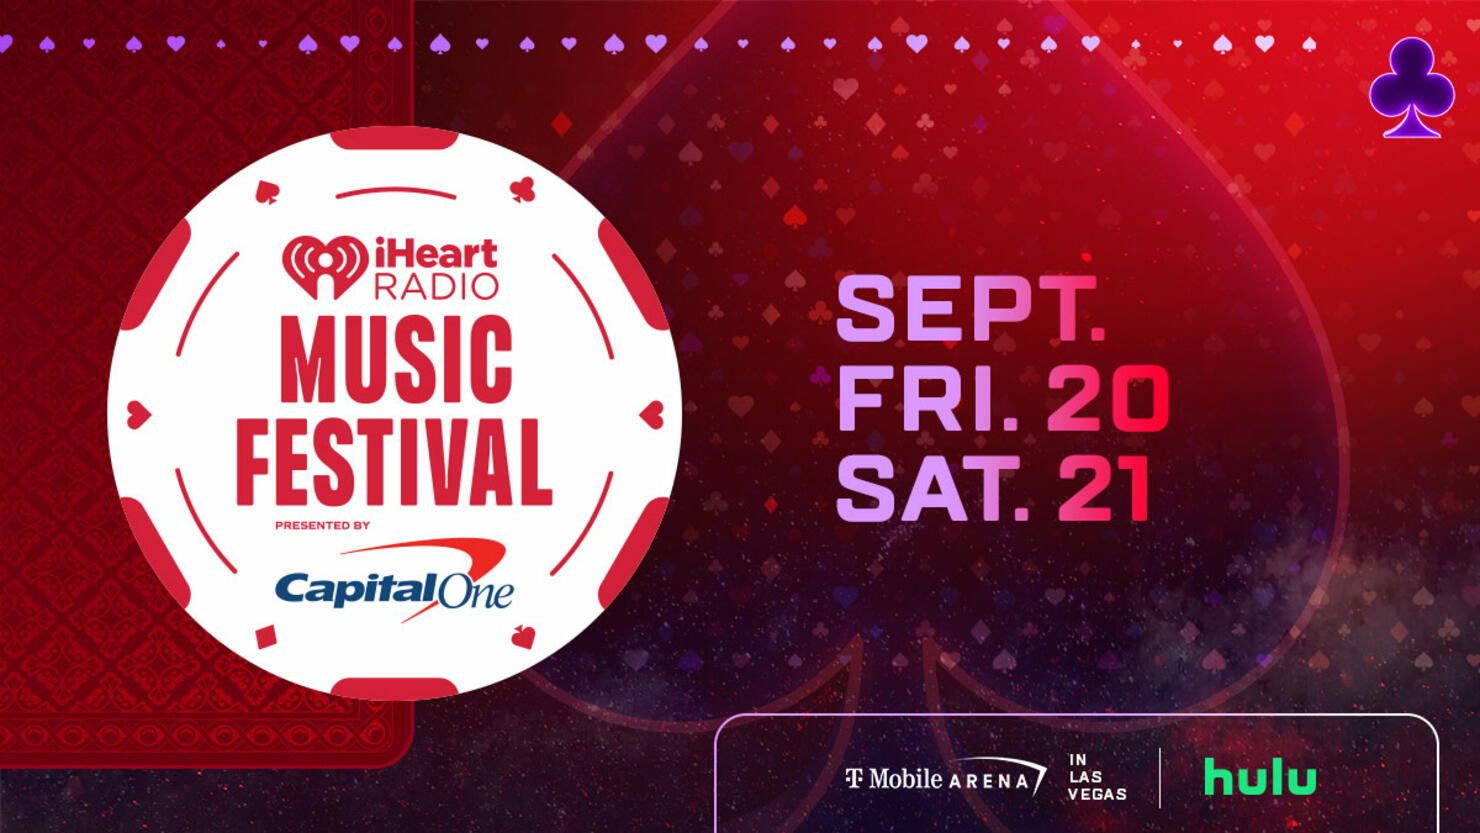 iHeartRadio Music Festival presented by Capital One